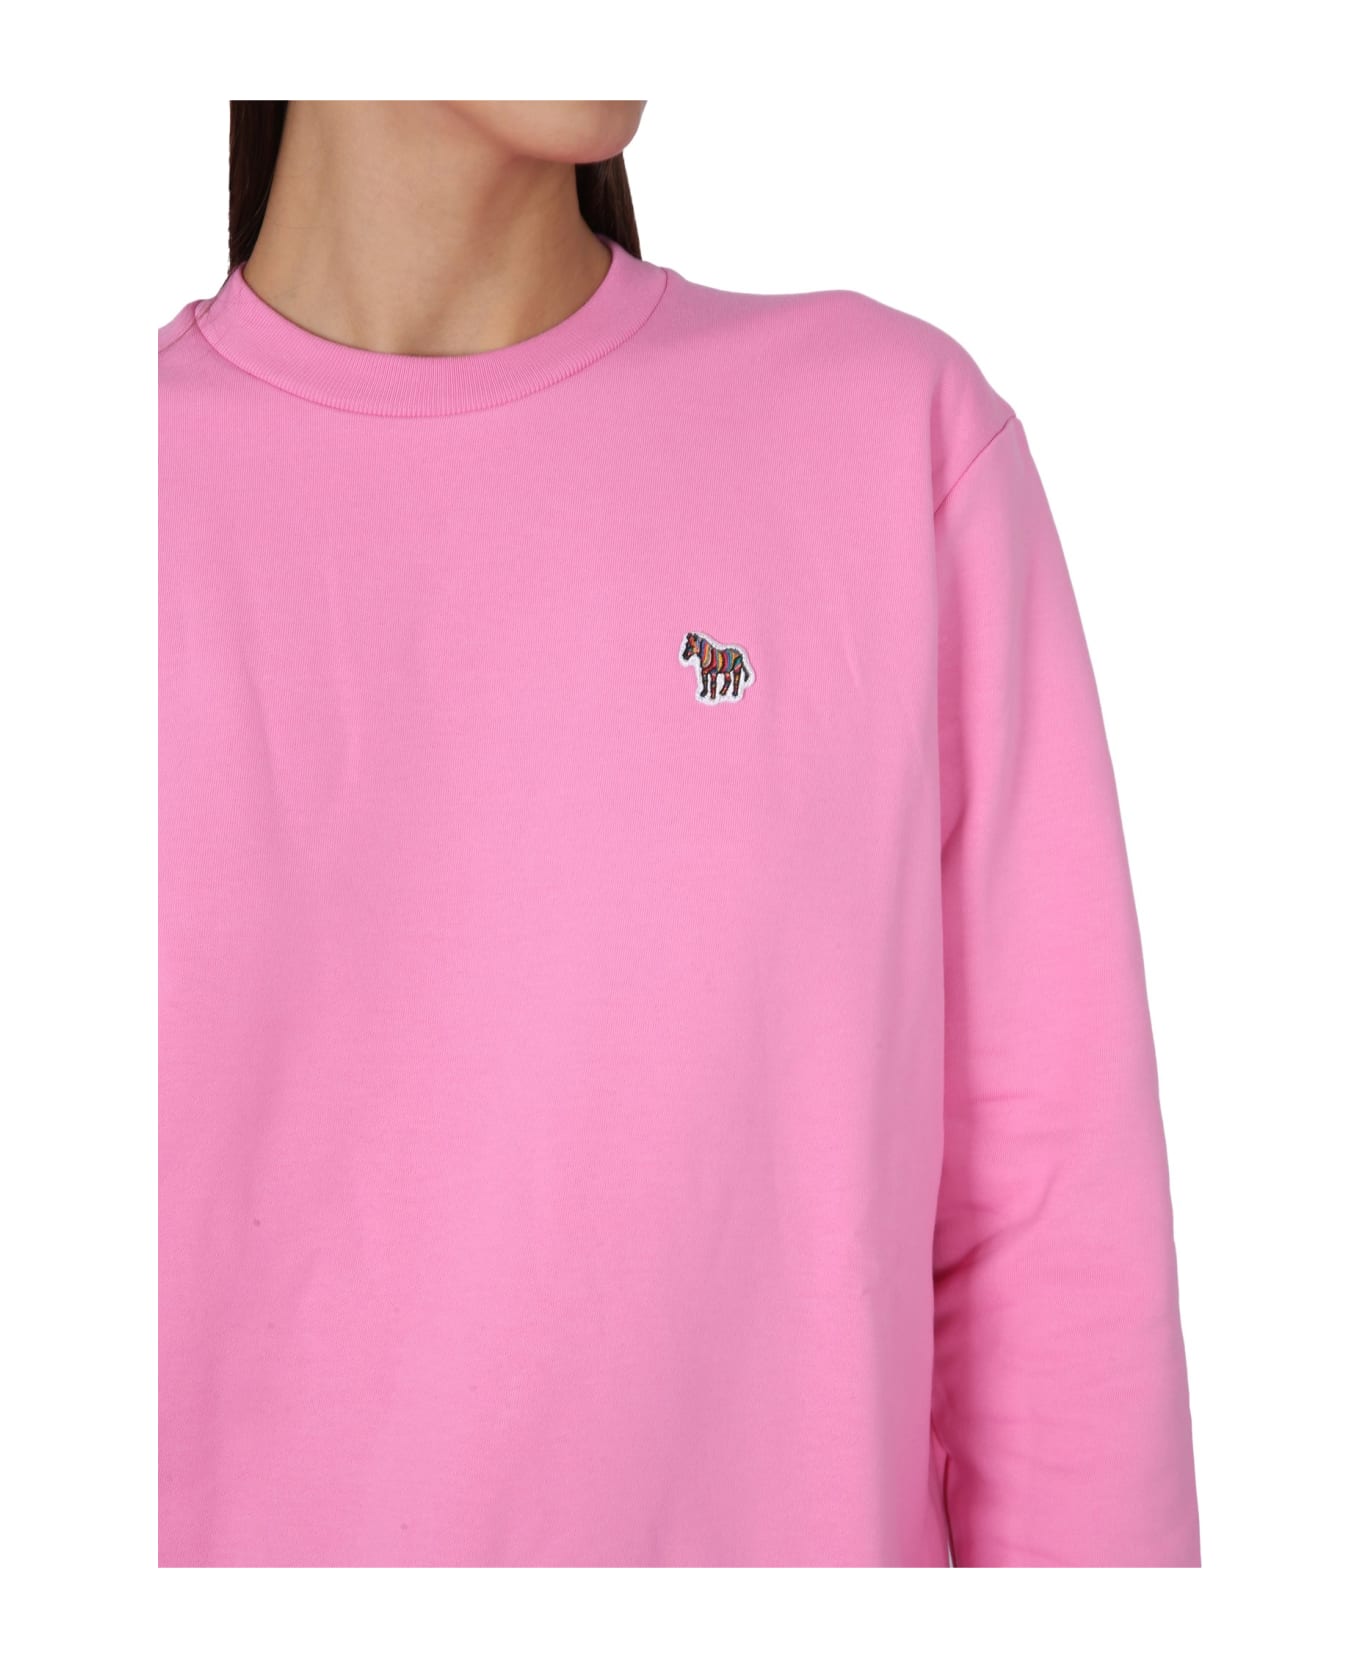 PS by Paul Smith Sweatshirt With Zebra Patch - PINK